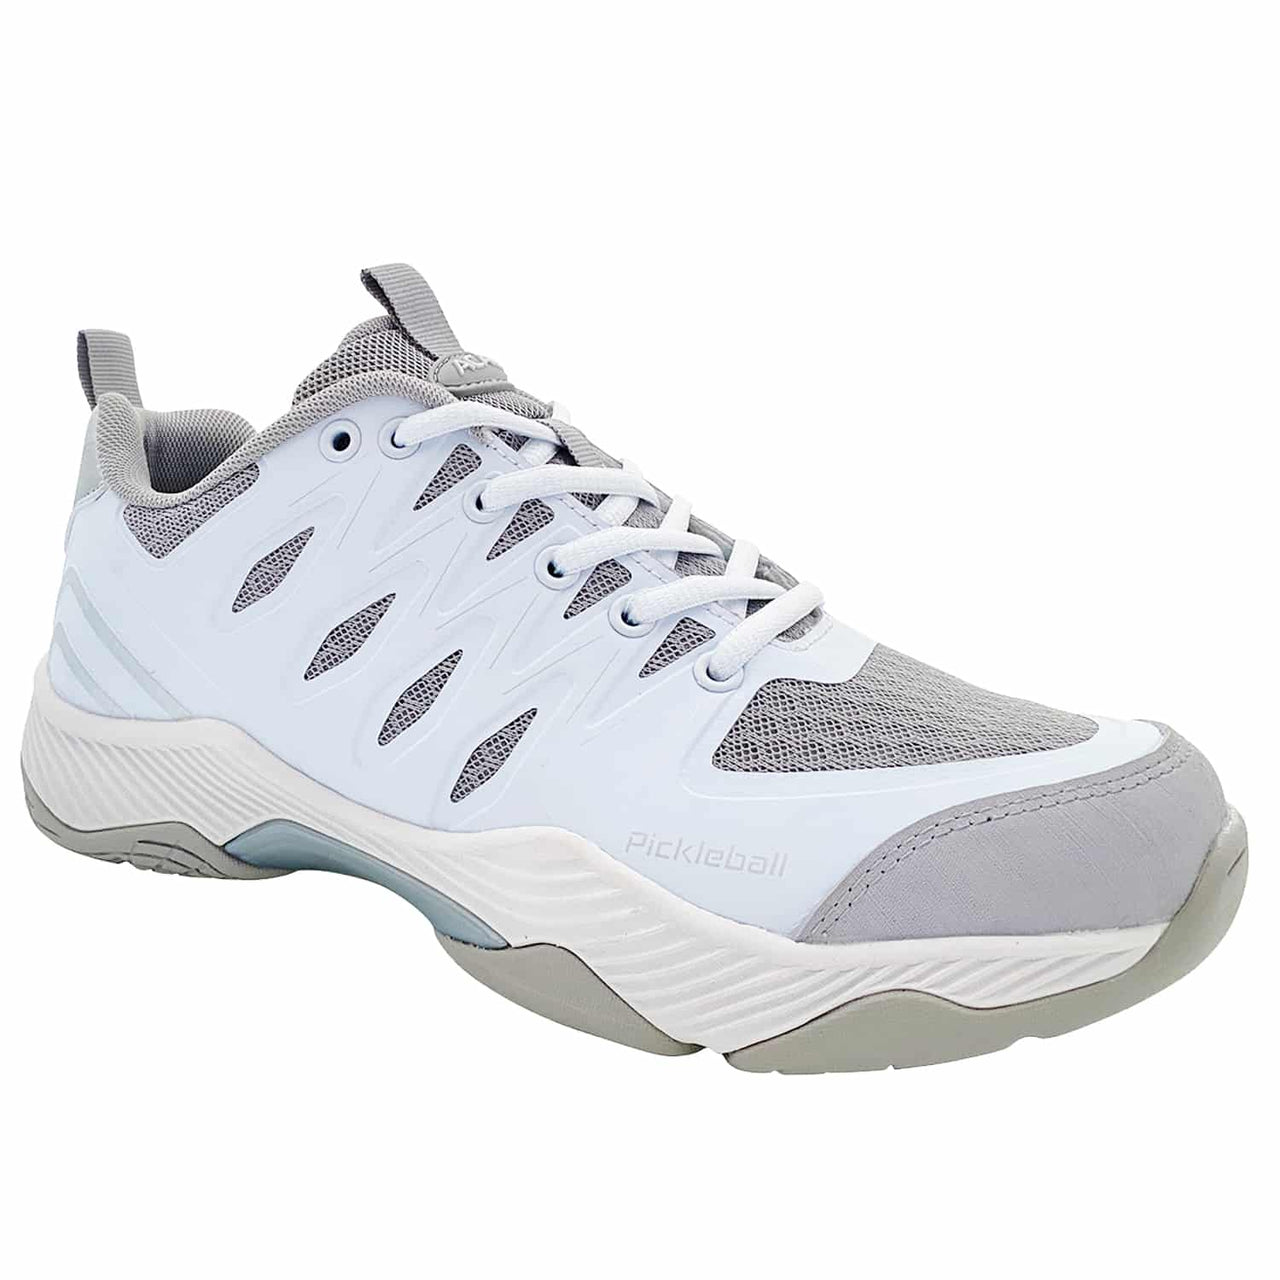 Acacia Sports - The “TYLER” Signature II Cloud Edition Pro Shoes